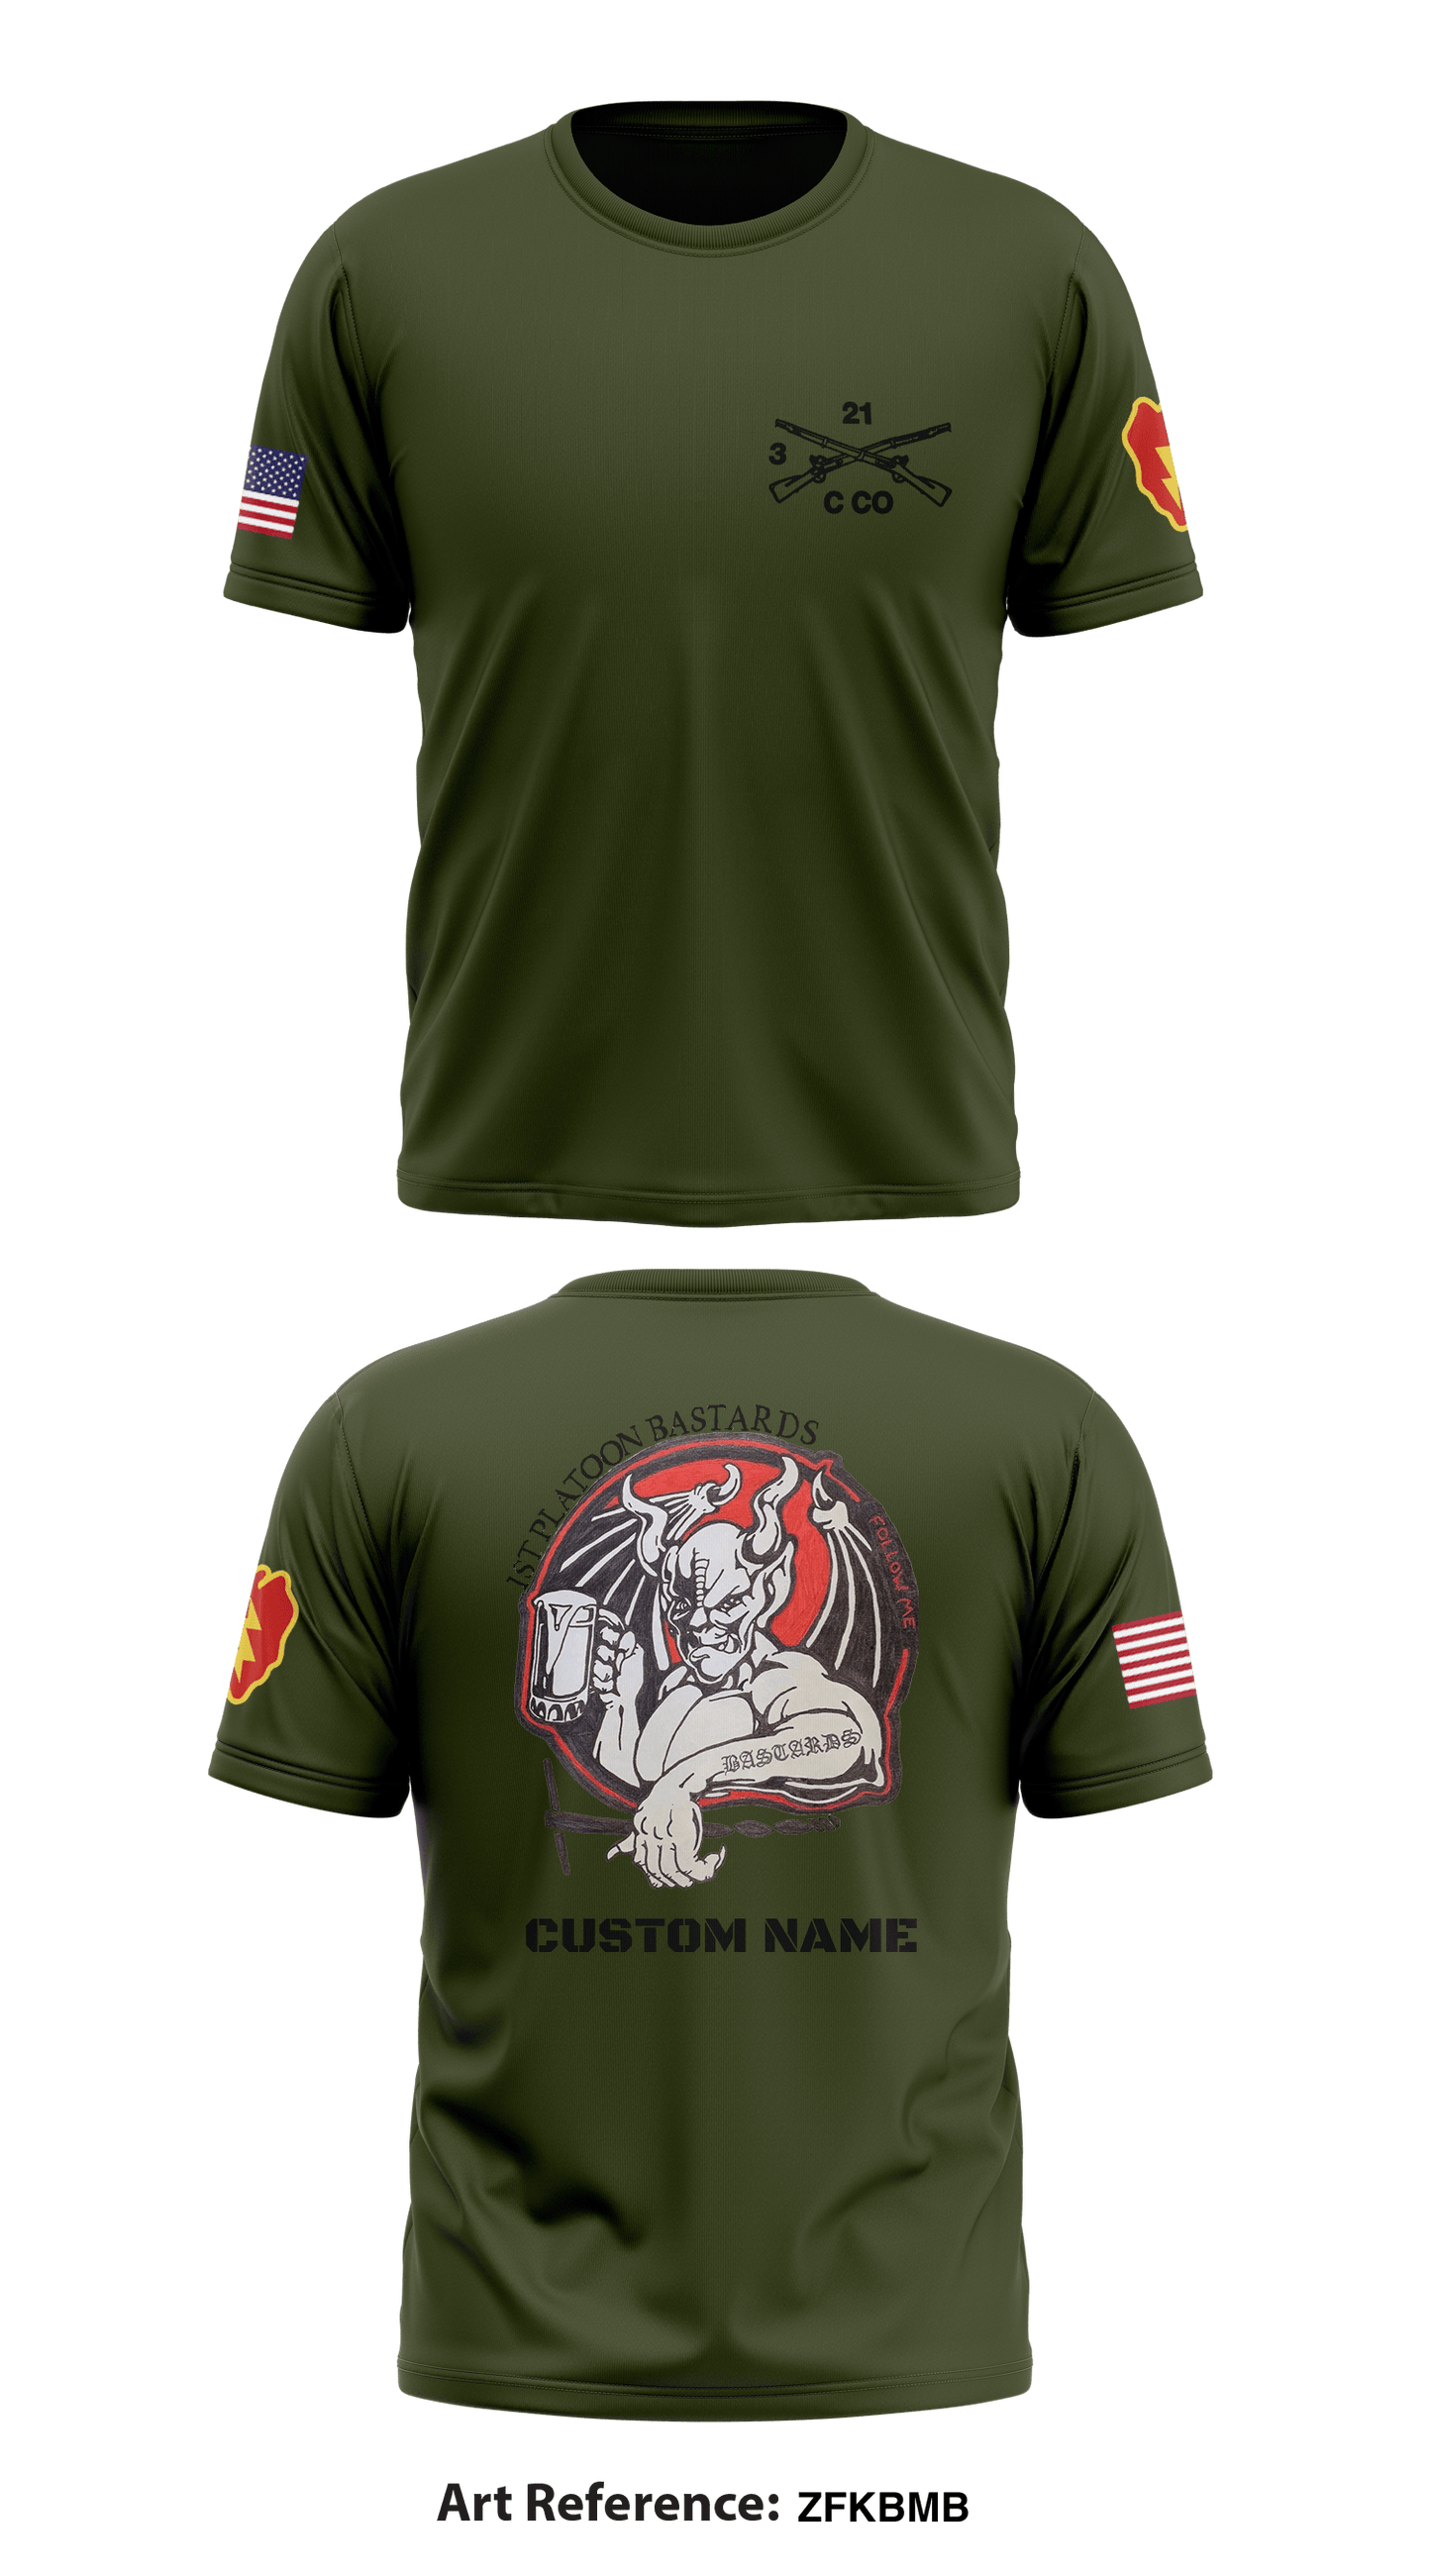 Charlie Company, 3-21 Infantry Store 1 Core Men's SS Performance Tee - ZFkbMb